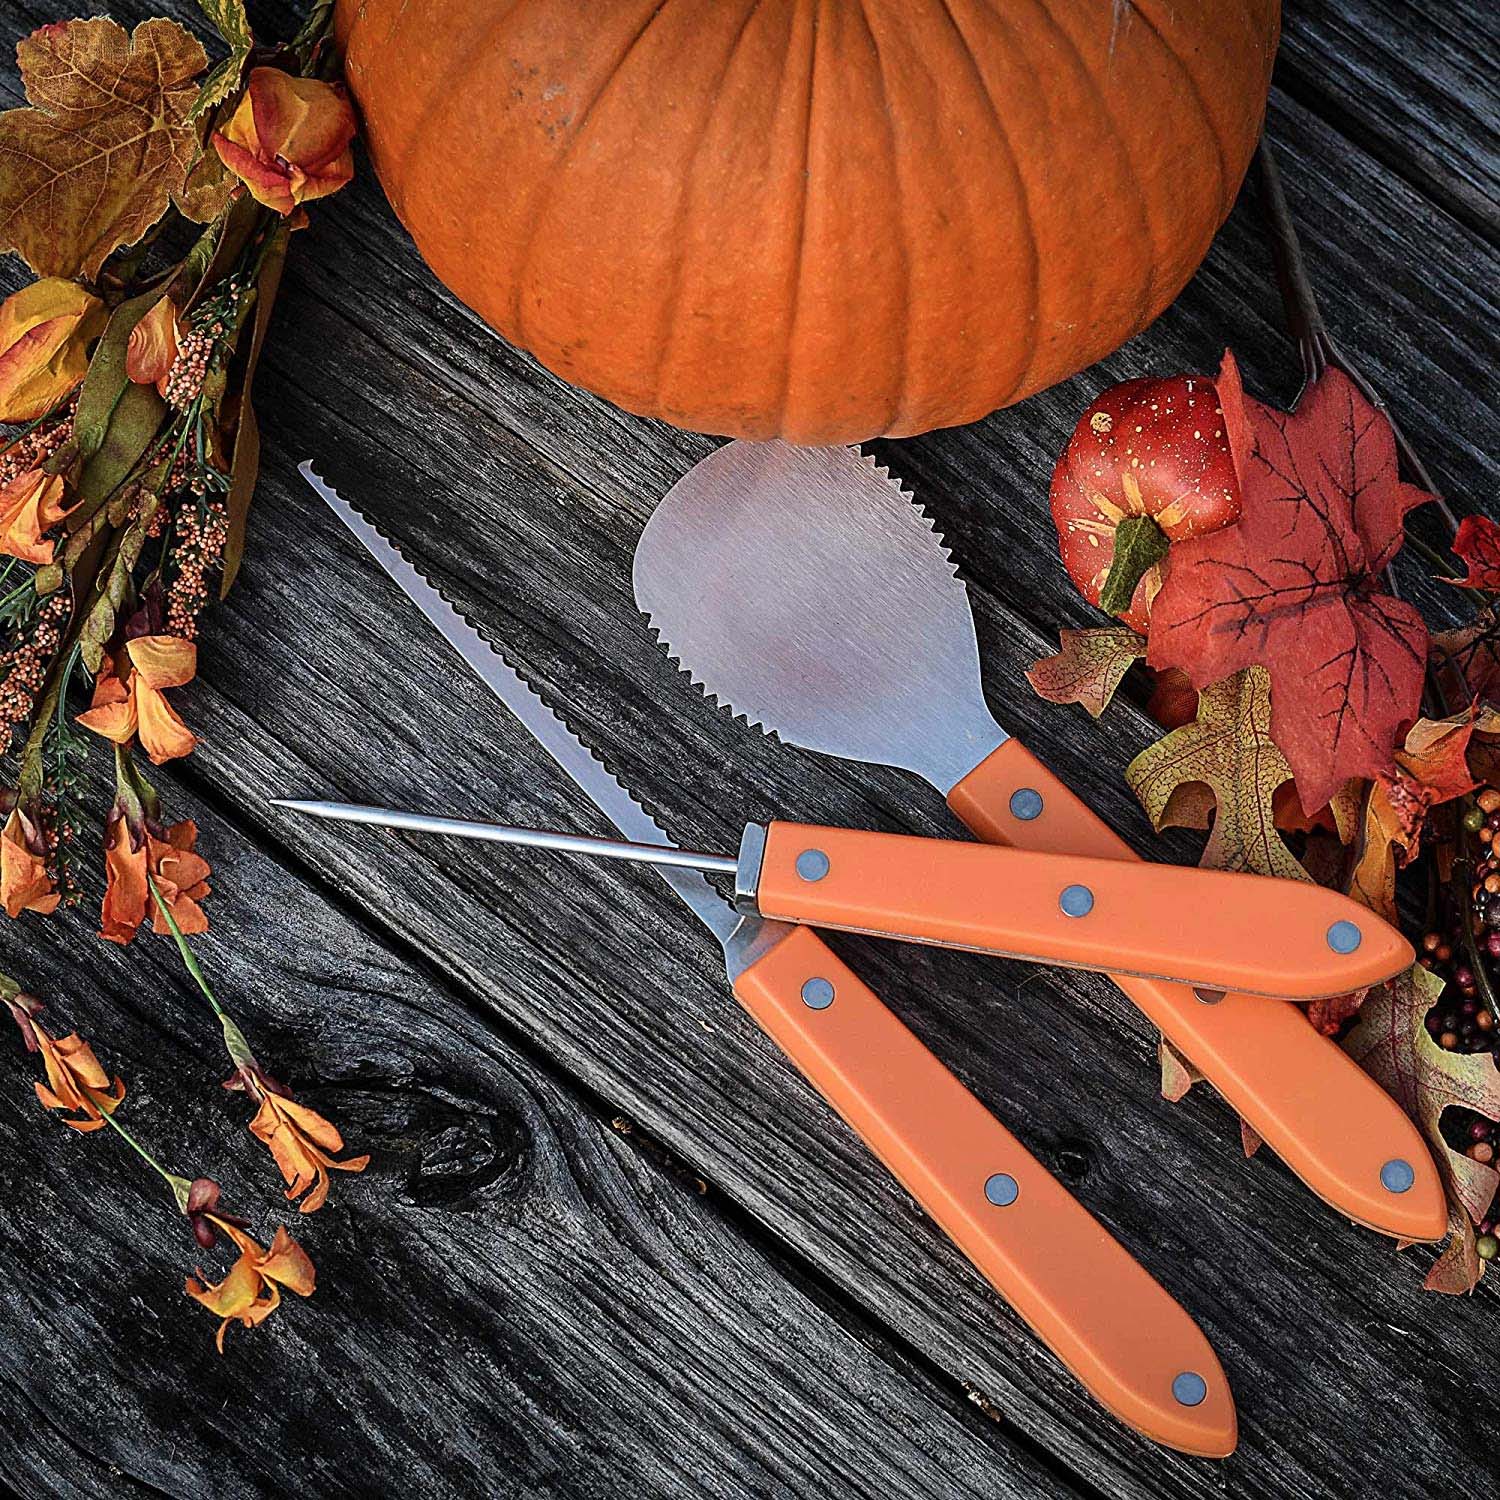 Pumpkins are arguably the most artistic vegetable. Channel your inner memelord and carve your favorite from the year with precision and accuracy.<br><br>A whole dang pumpkin carving kit is waiting for you right <a href="https://amzn.to/2MV1ZSw" "nofollow" target="_blank">here</a>.